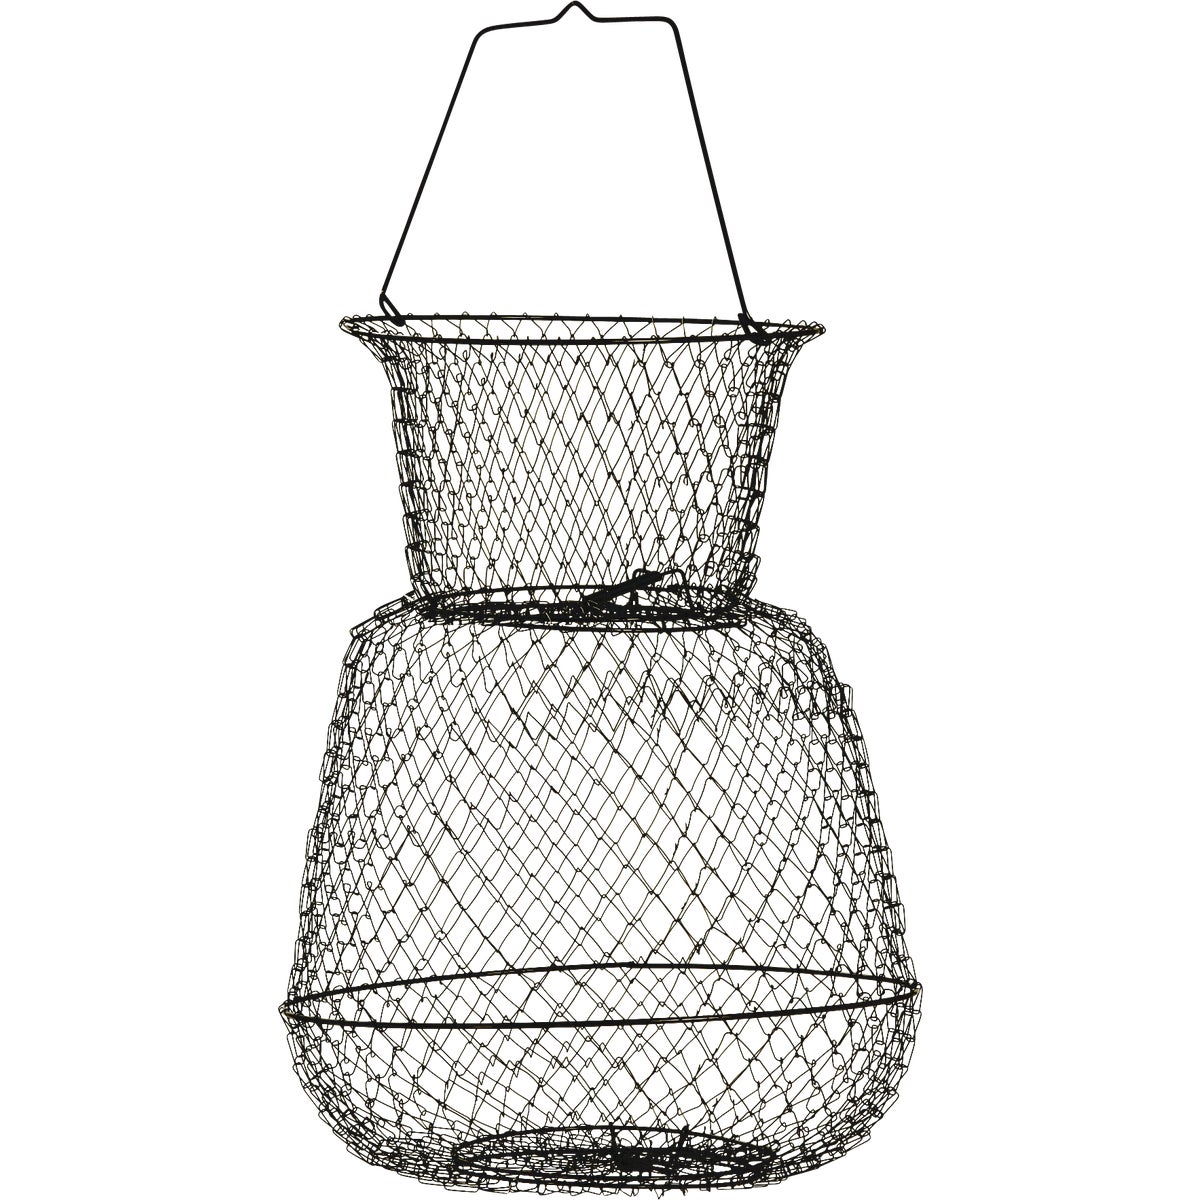 Item 835404, Round wire fish basket features Uni-chrome plating to resist rust and 